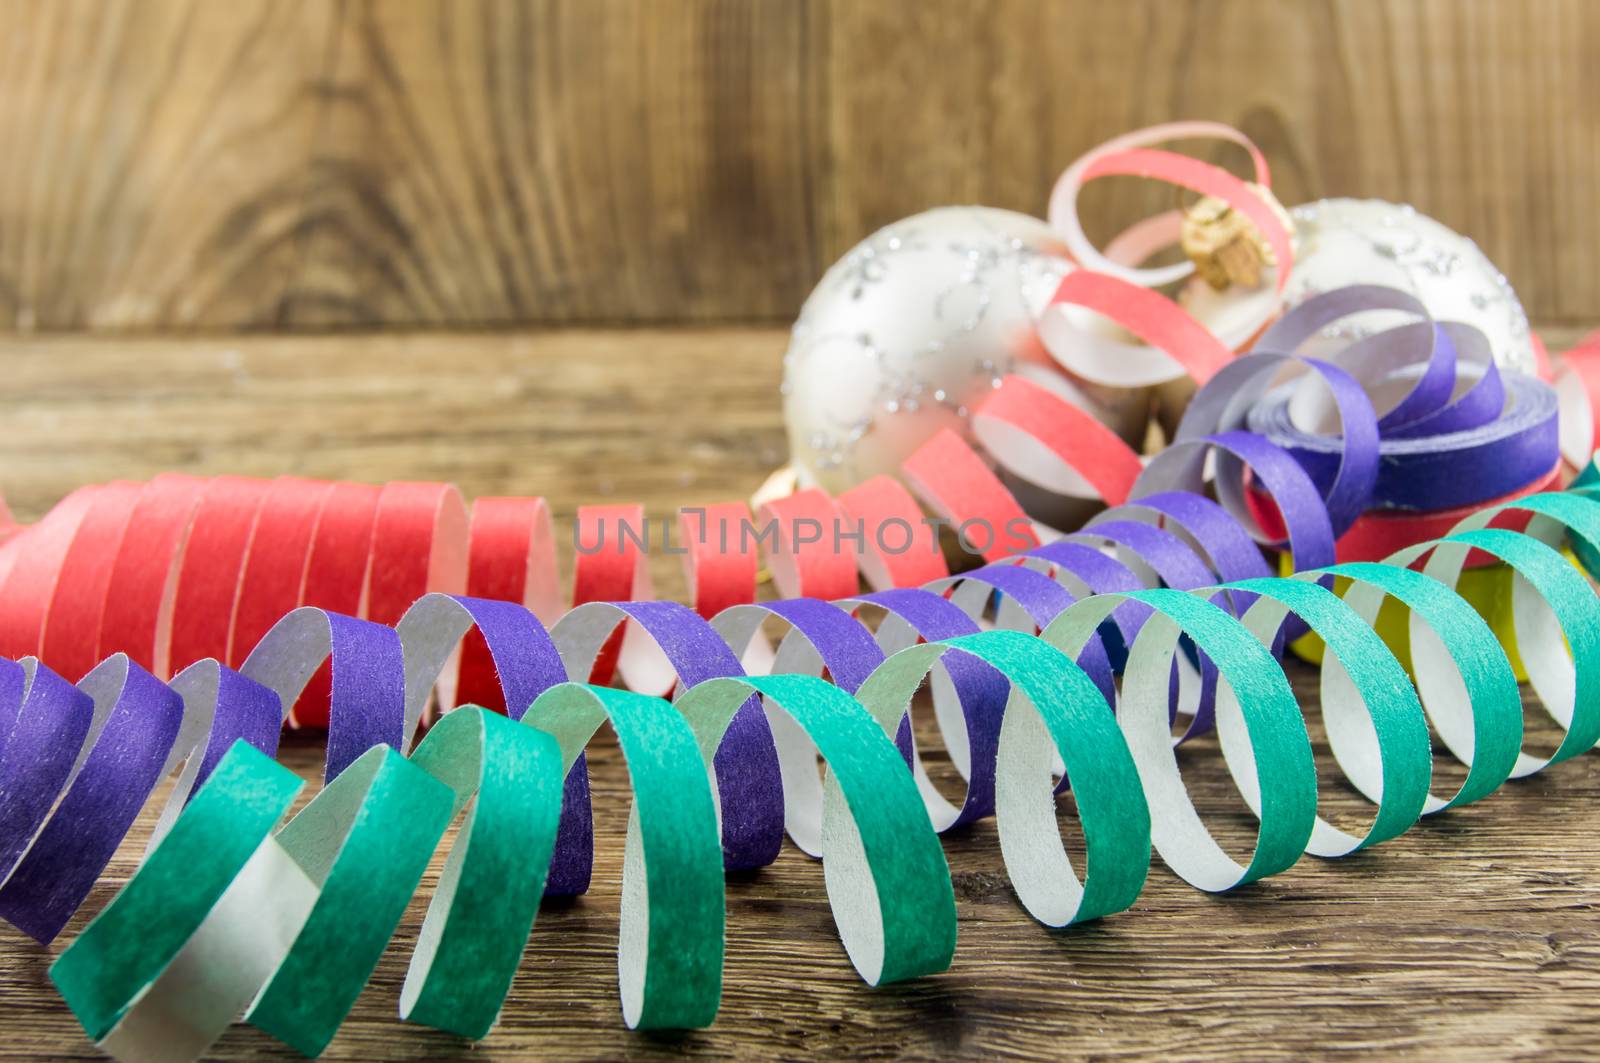 Bright christmas composition on wooden background. For your commercial and editorial use.